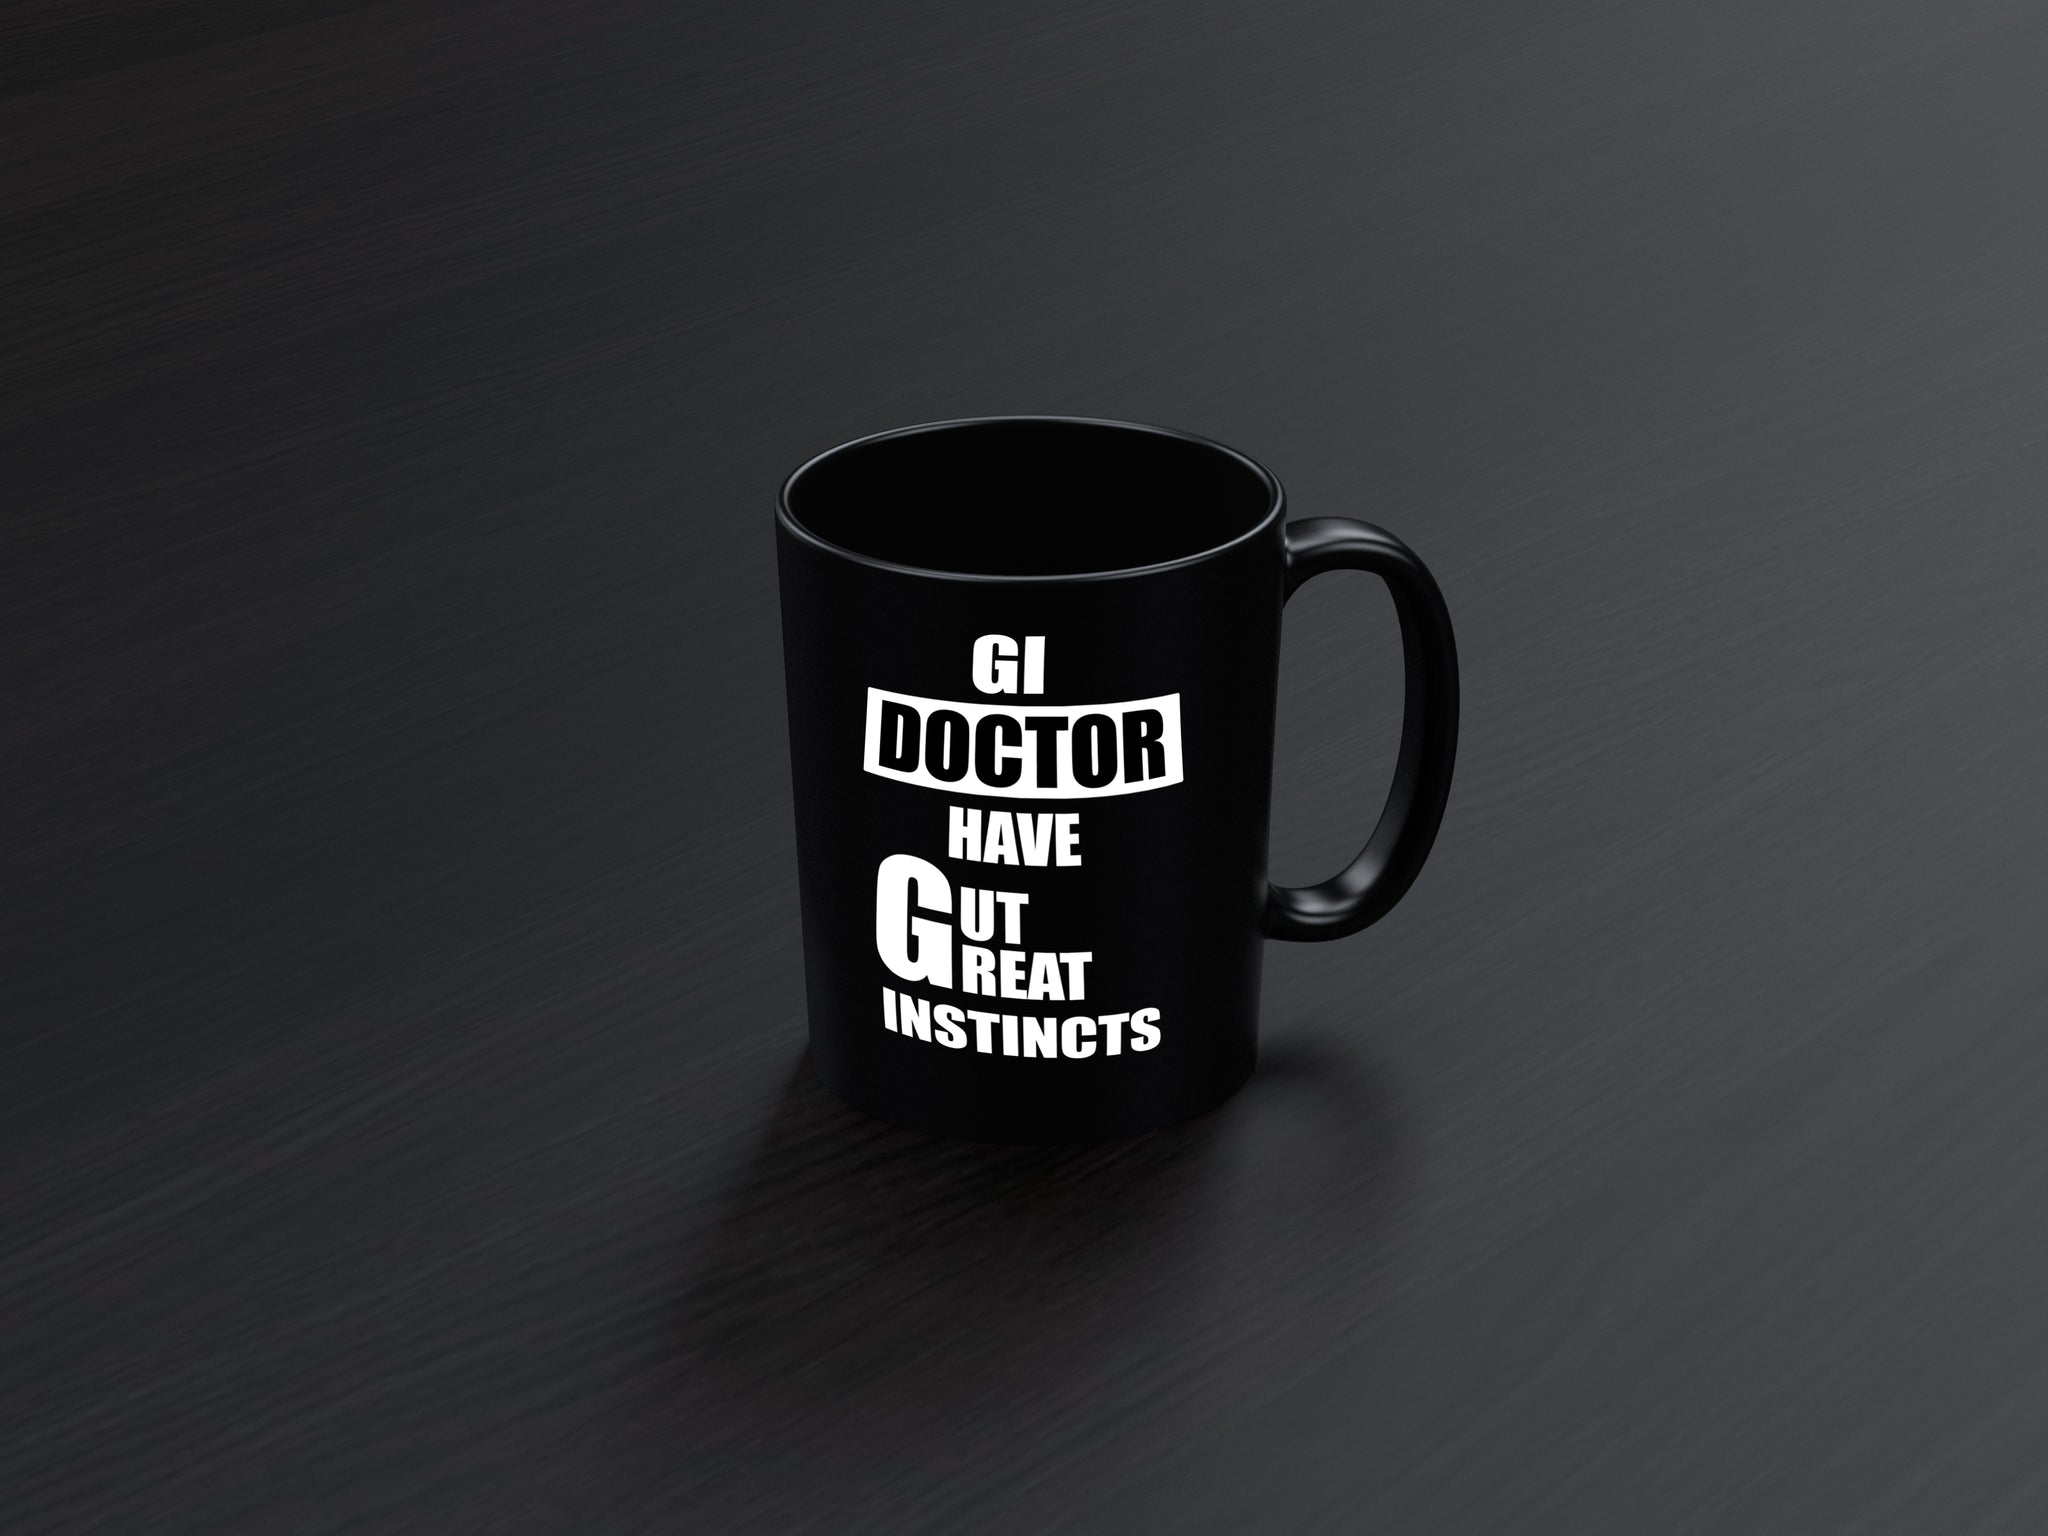 Skitongifts Funny Ceramic Coffee Mug For Birthday, Mother's Day, Father's Day, Christmas Gi Doctor Gastroenterology Gastroenterologist